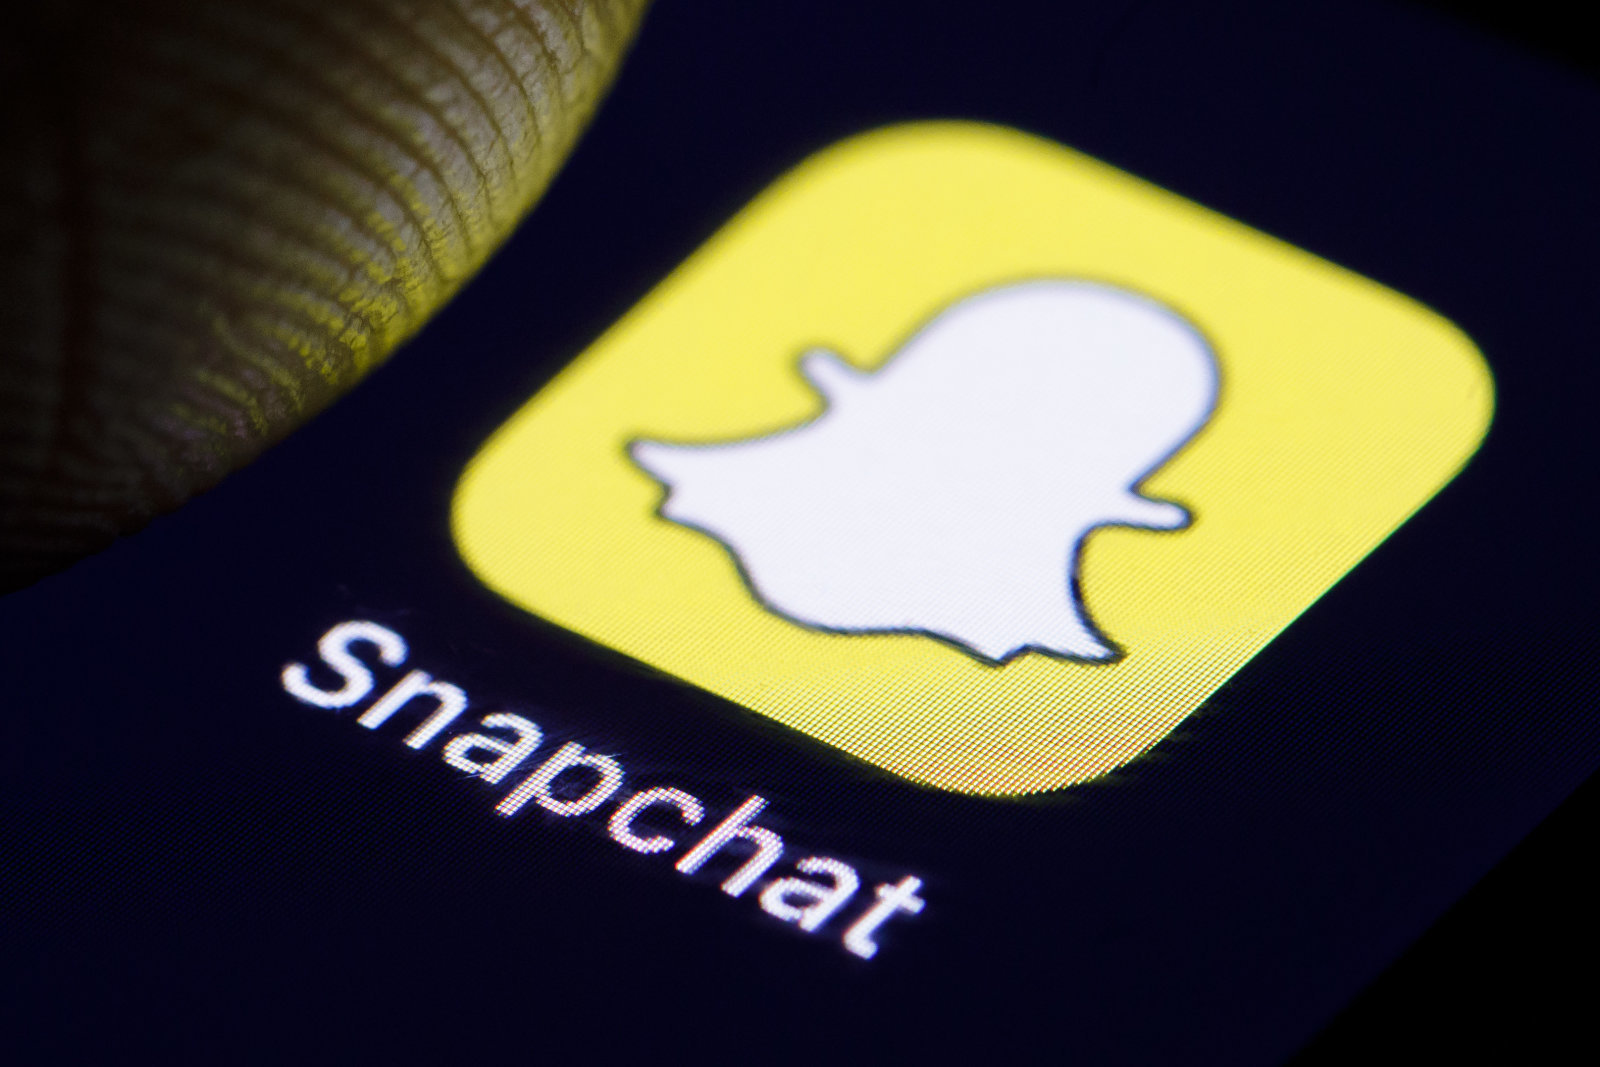 Snapchat Trying to License Major Label Content from Universal Music, Sony Music and Warner Music